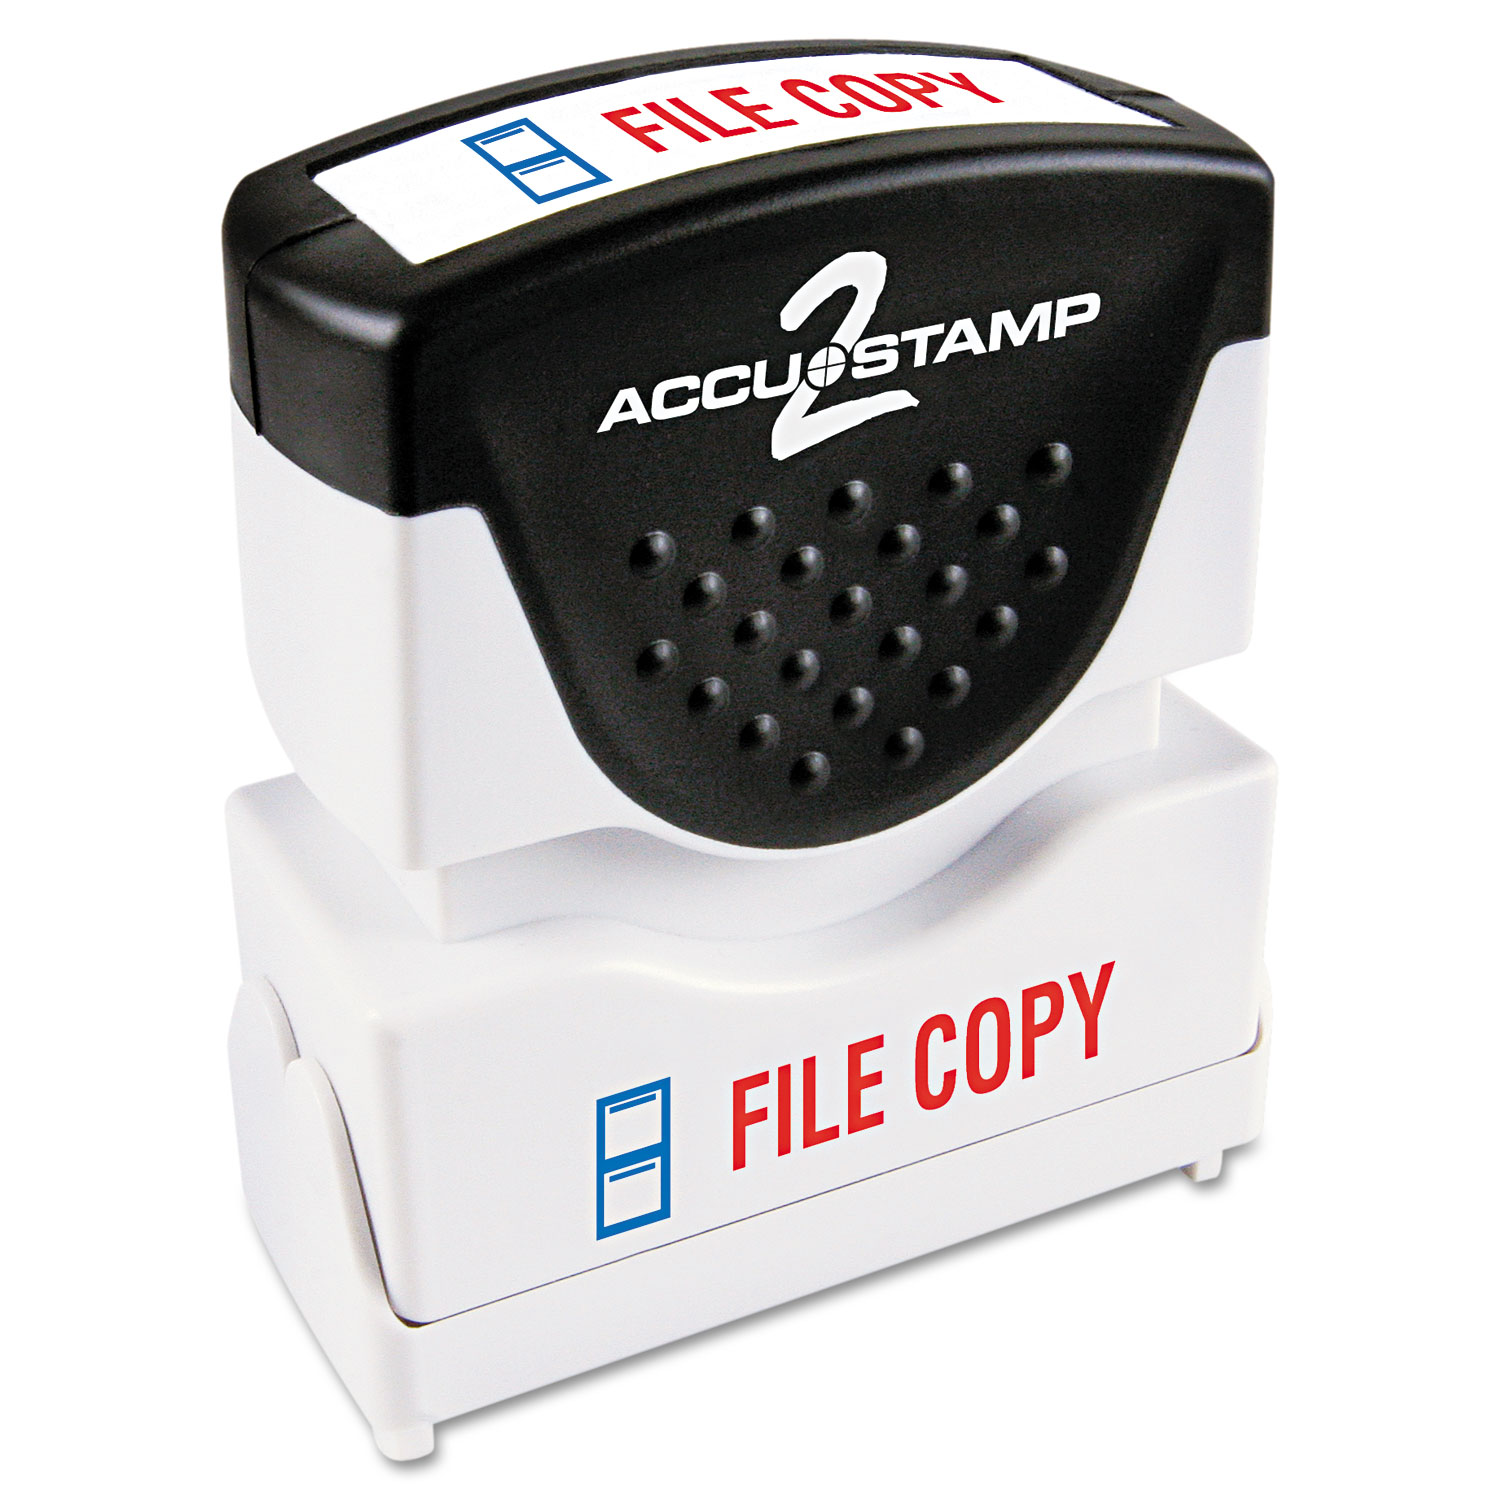  ACCUSTAMP2 035524 Pre-Inked Shutter Stamp, Red/Blue, FILE COPY, 1 5/8 x 1/2 (COS035524) 